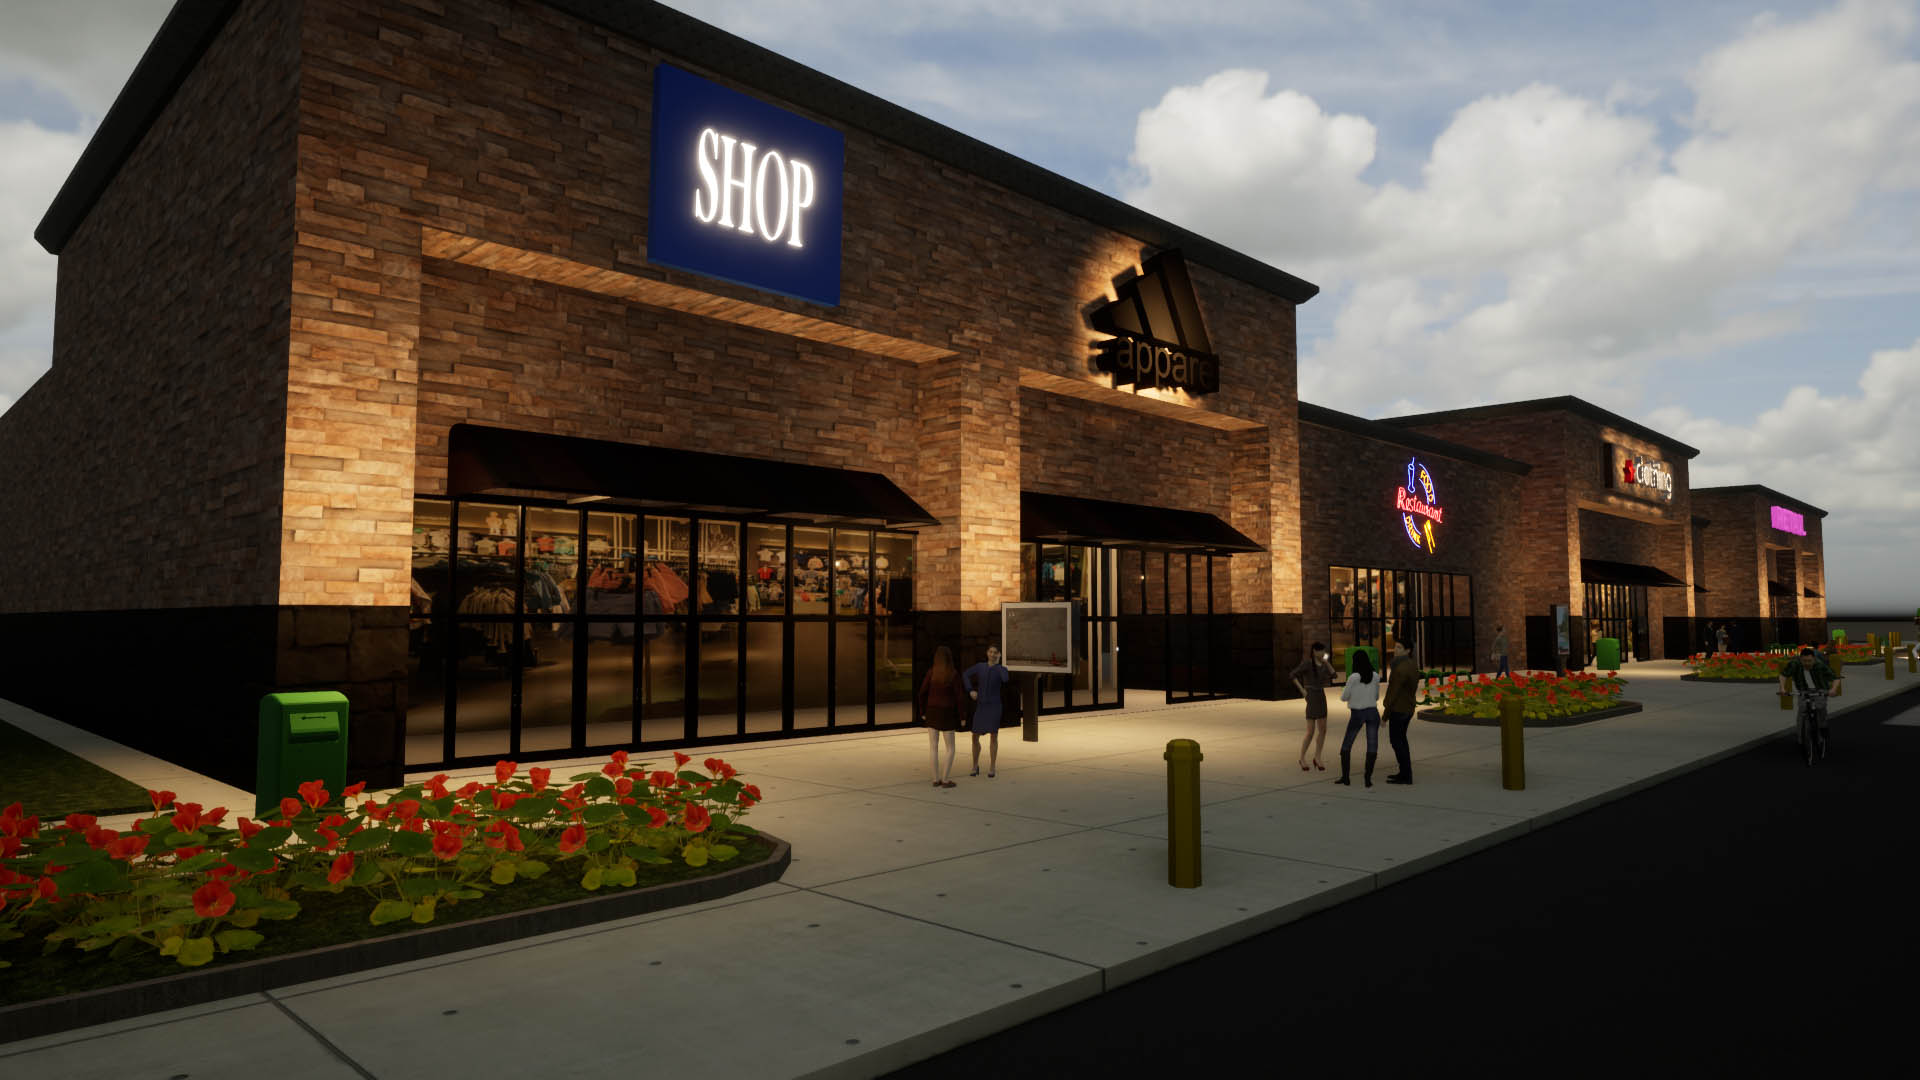 rendering of shopping center in the evening